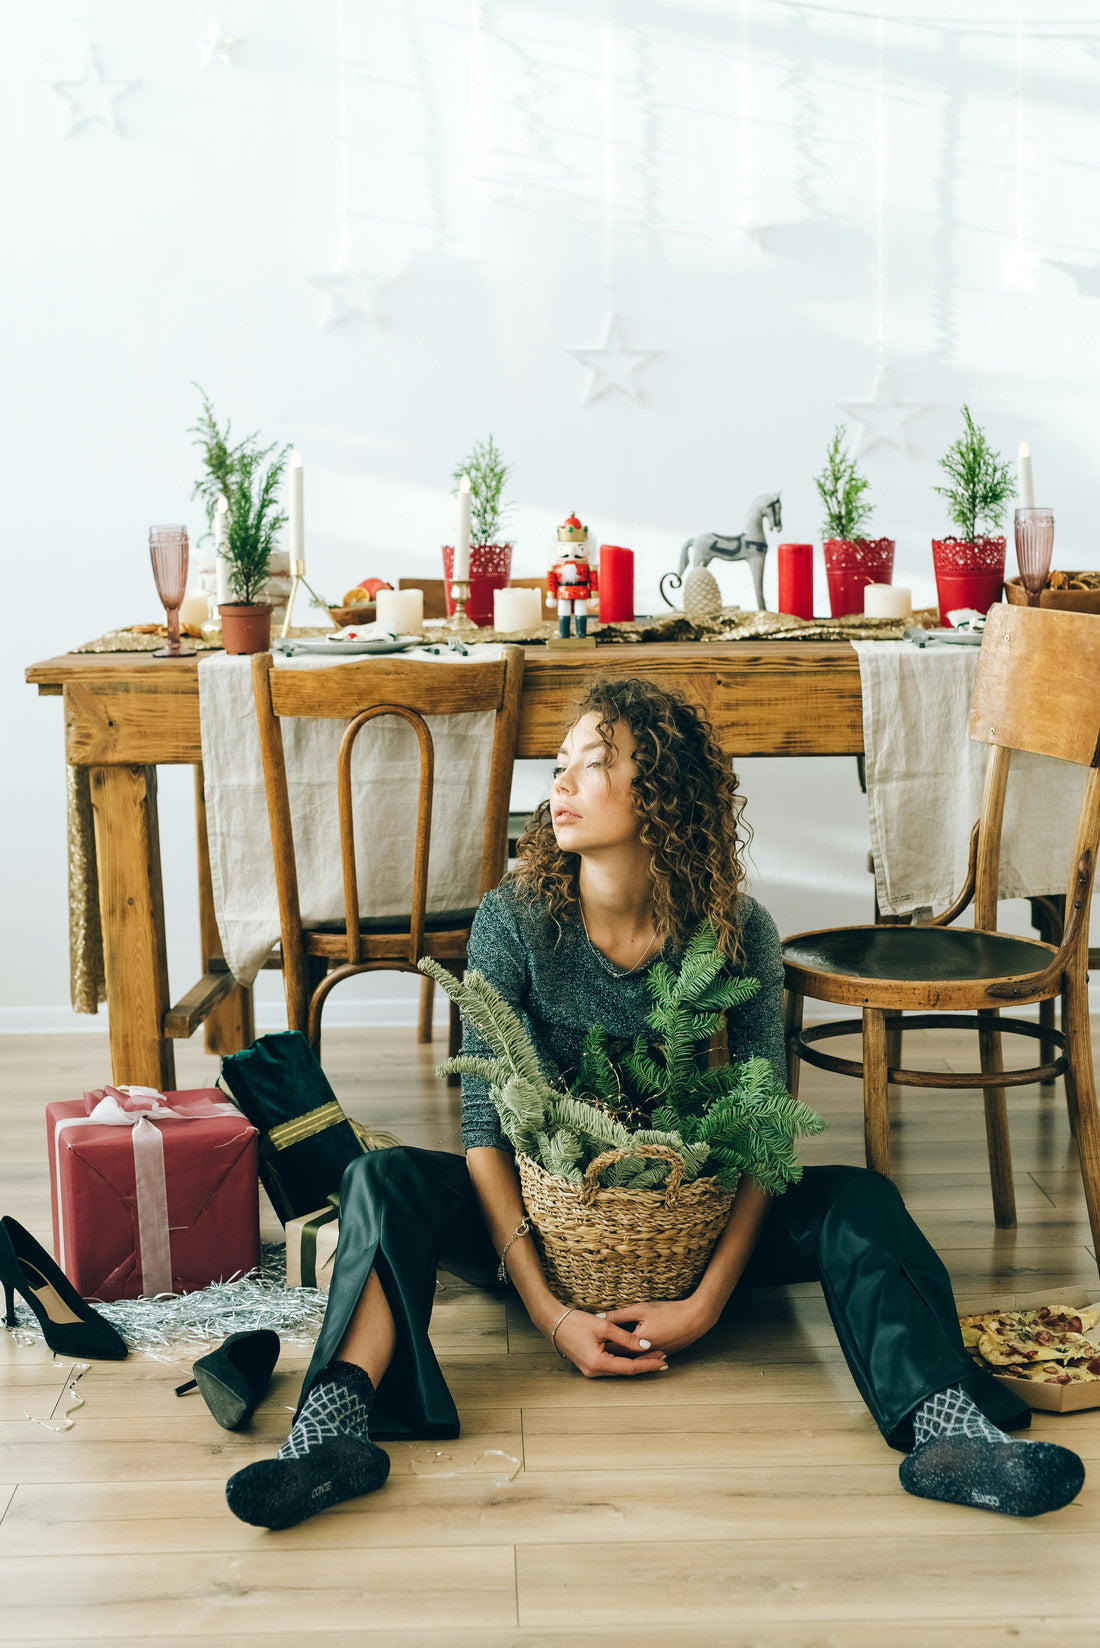 girl sitting on floor with holiday table scene looking depressed